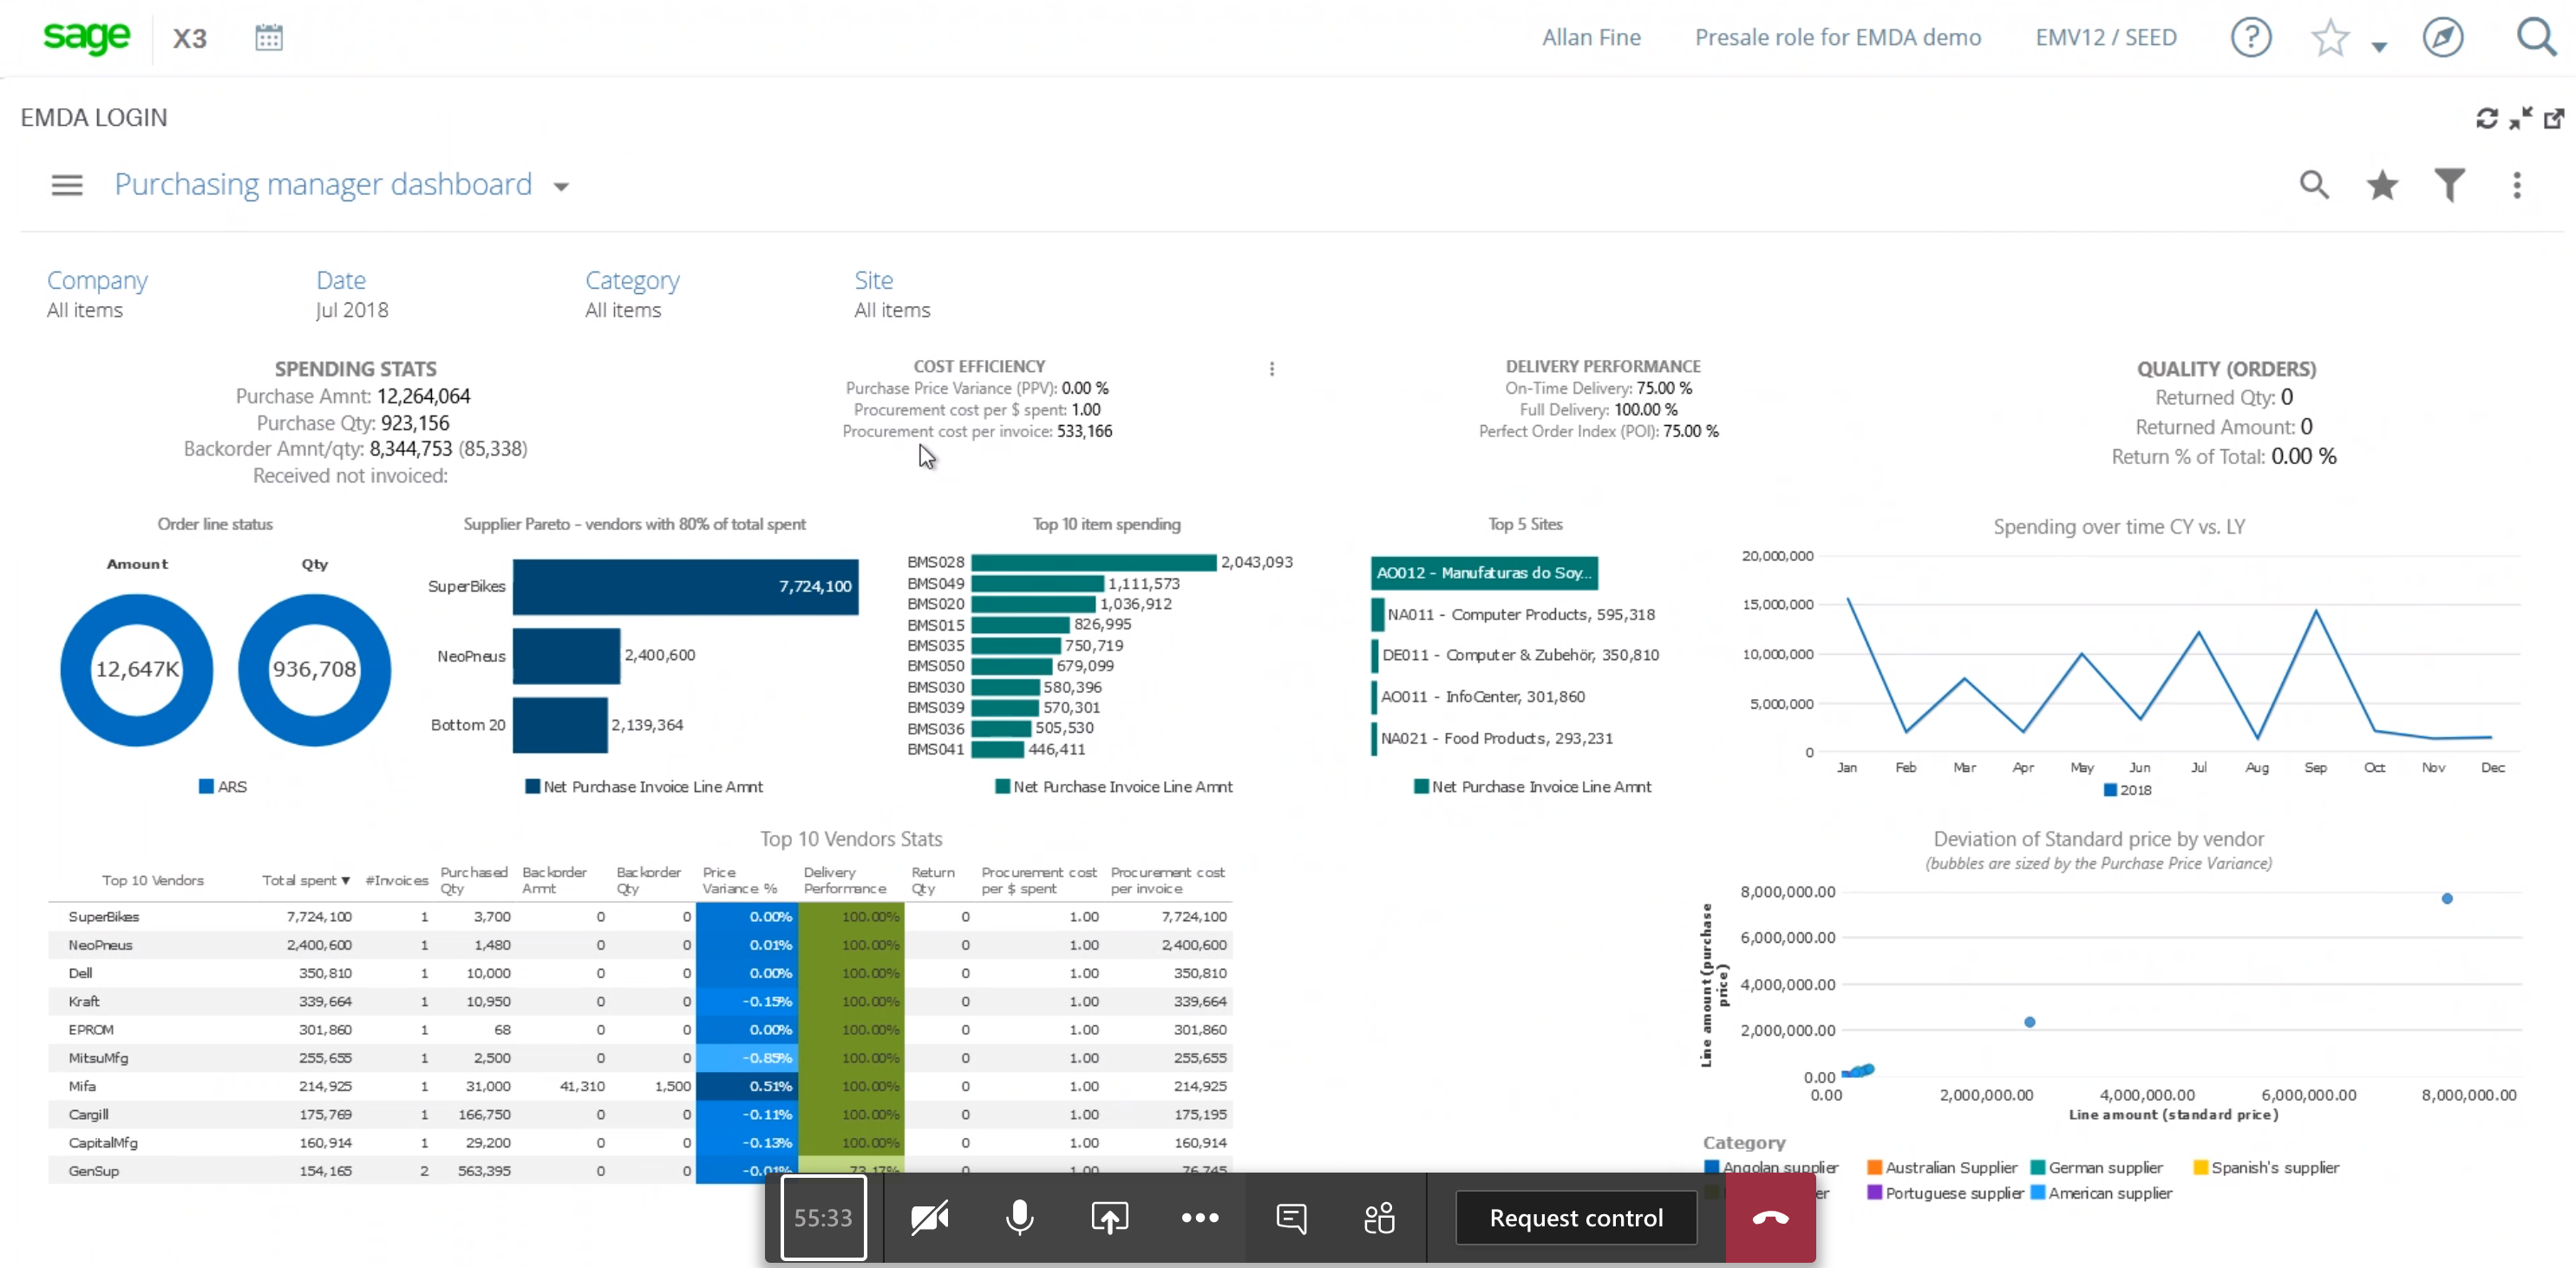 Sage X3 Software - Financial reporting purchasing manager dashboard